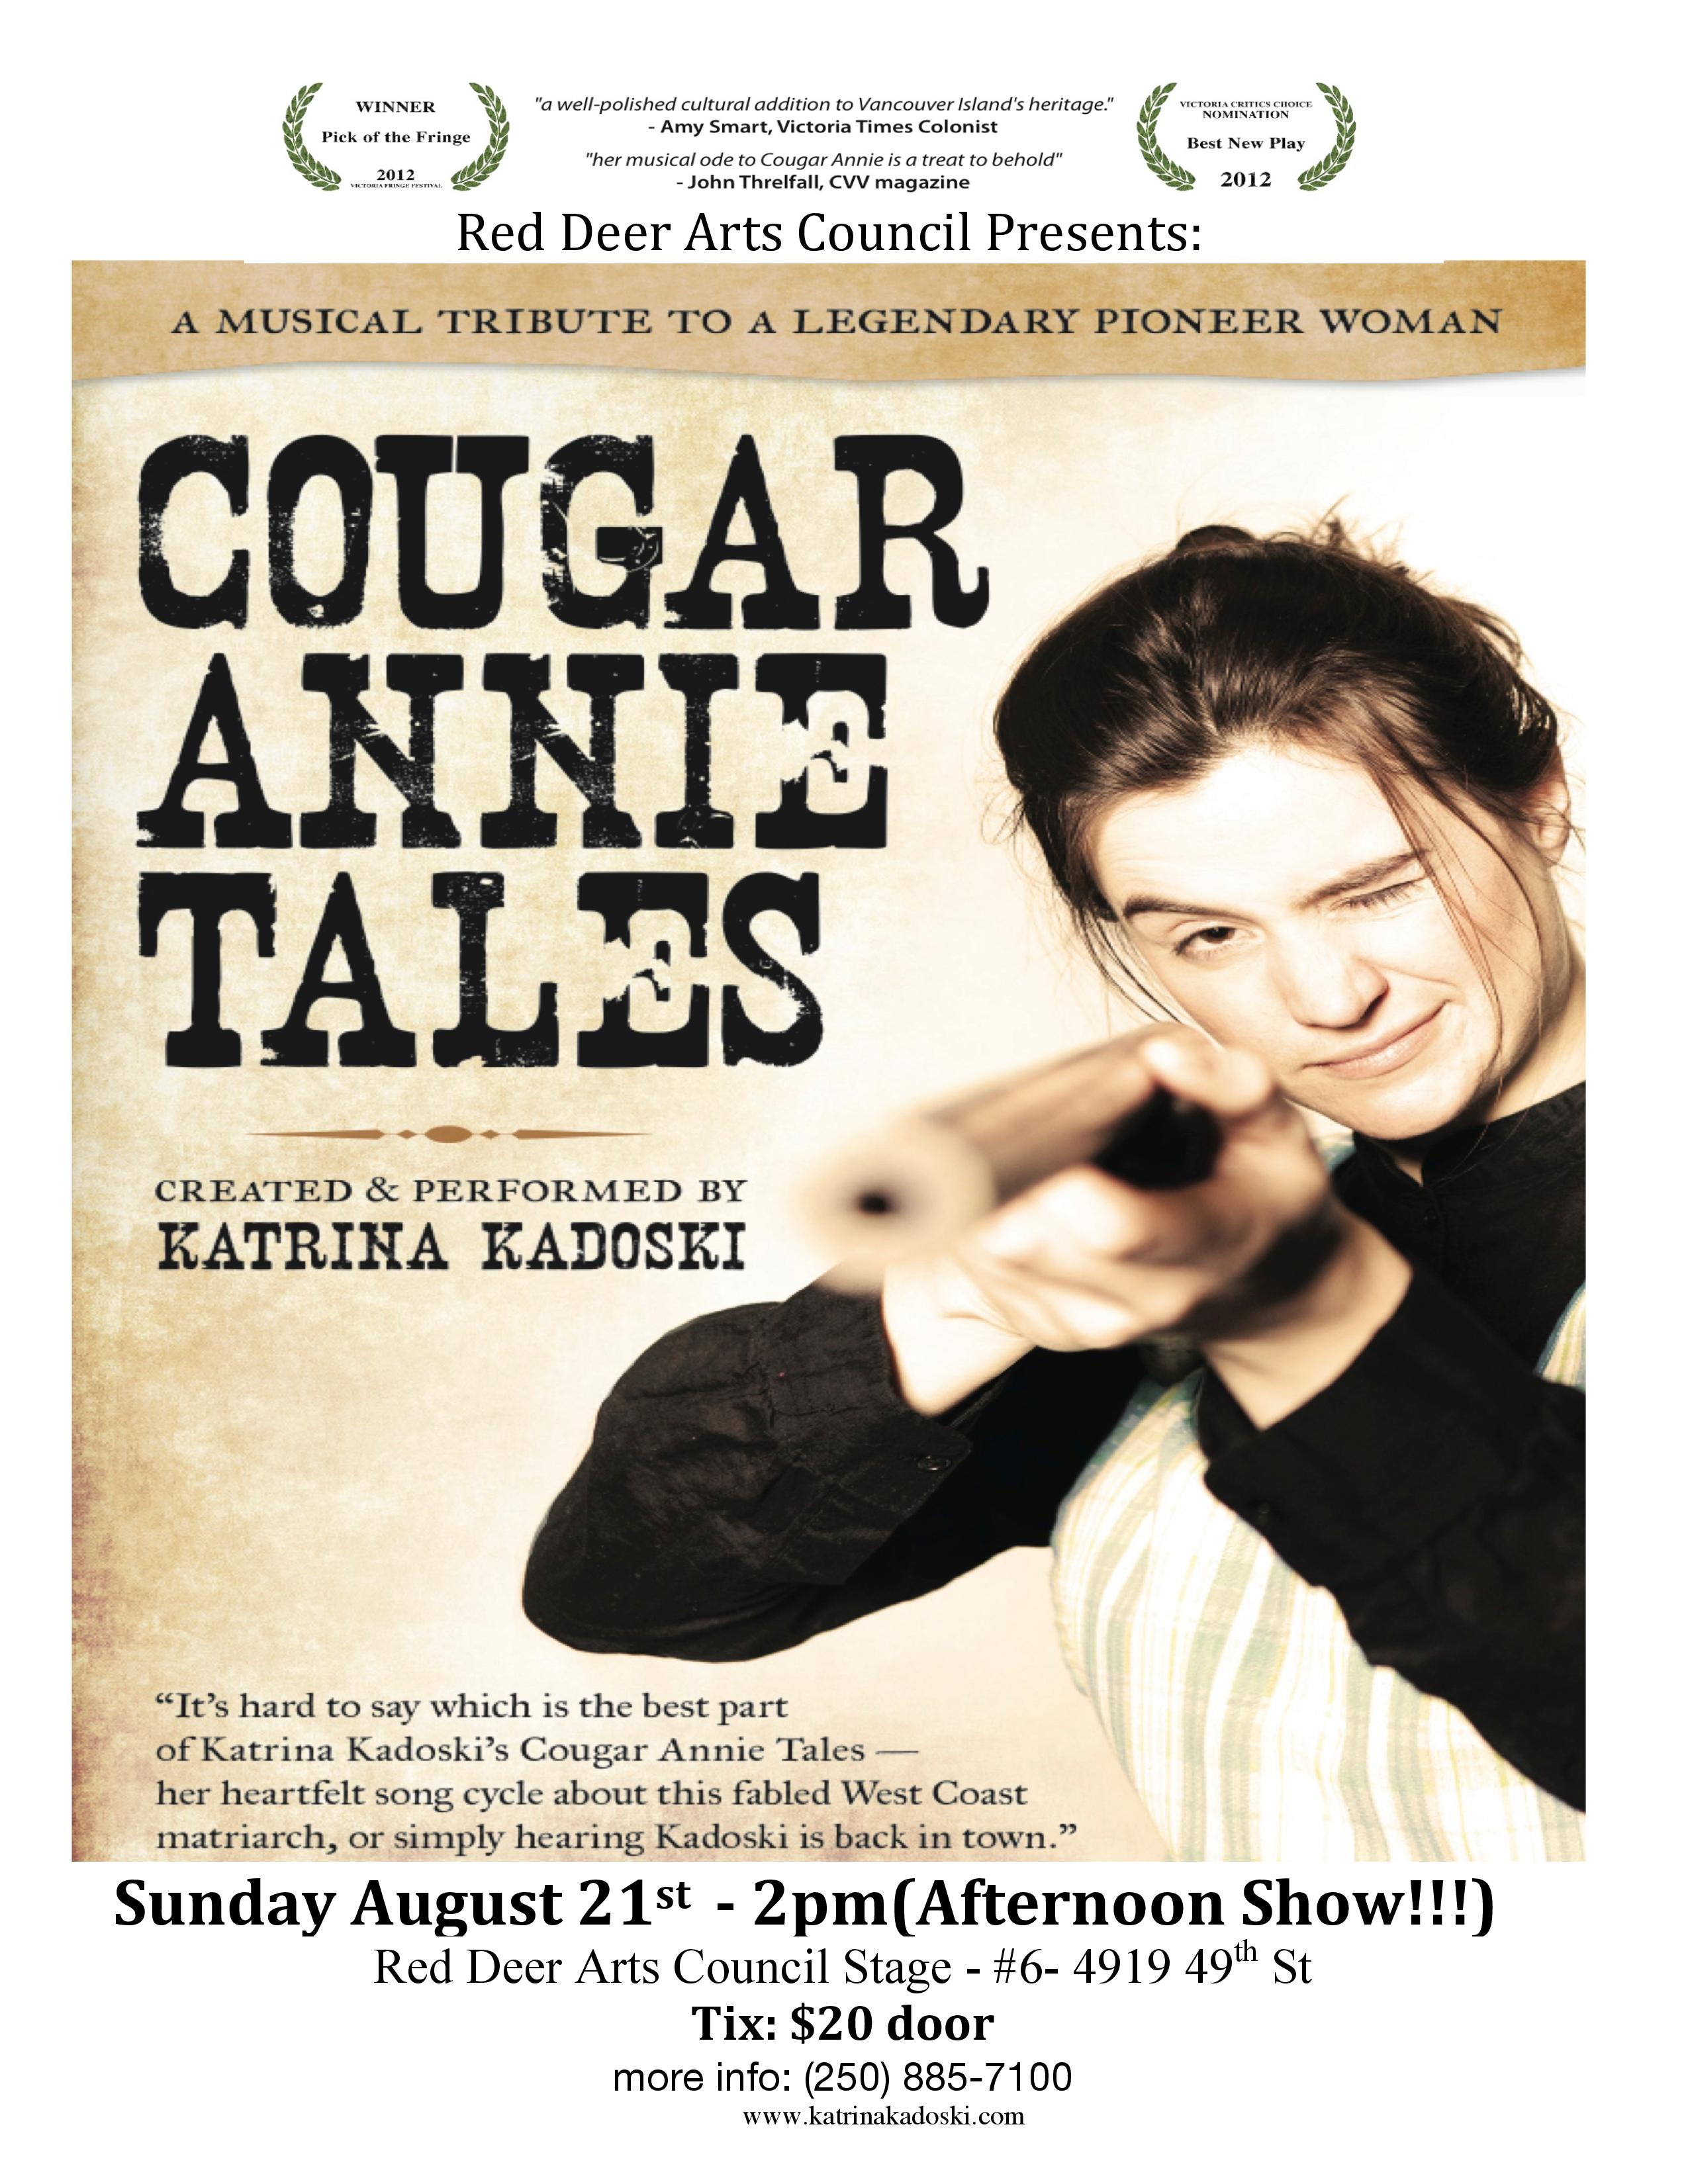 Cougar Annie Tales - A Legendary Tribute to a Legendary Pioneer Woman